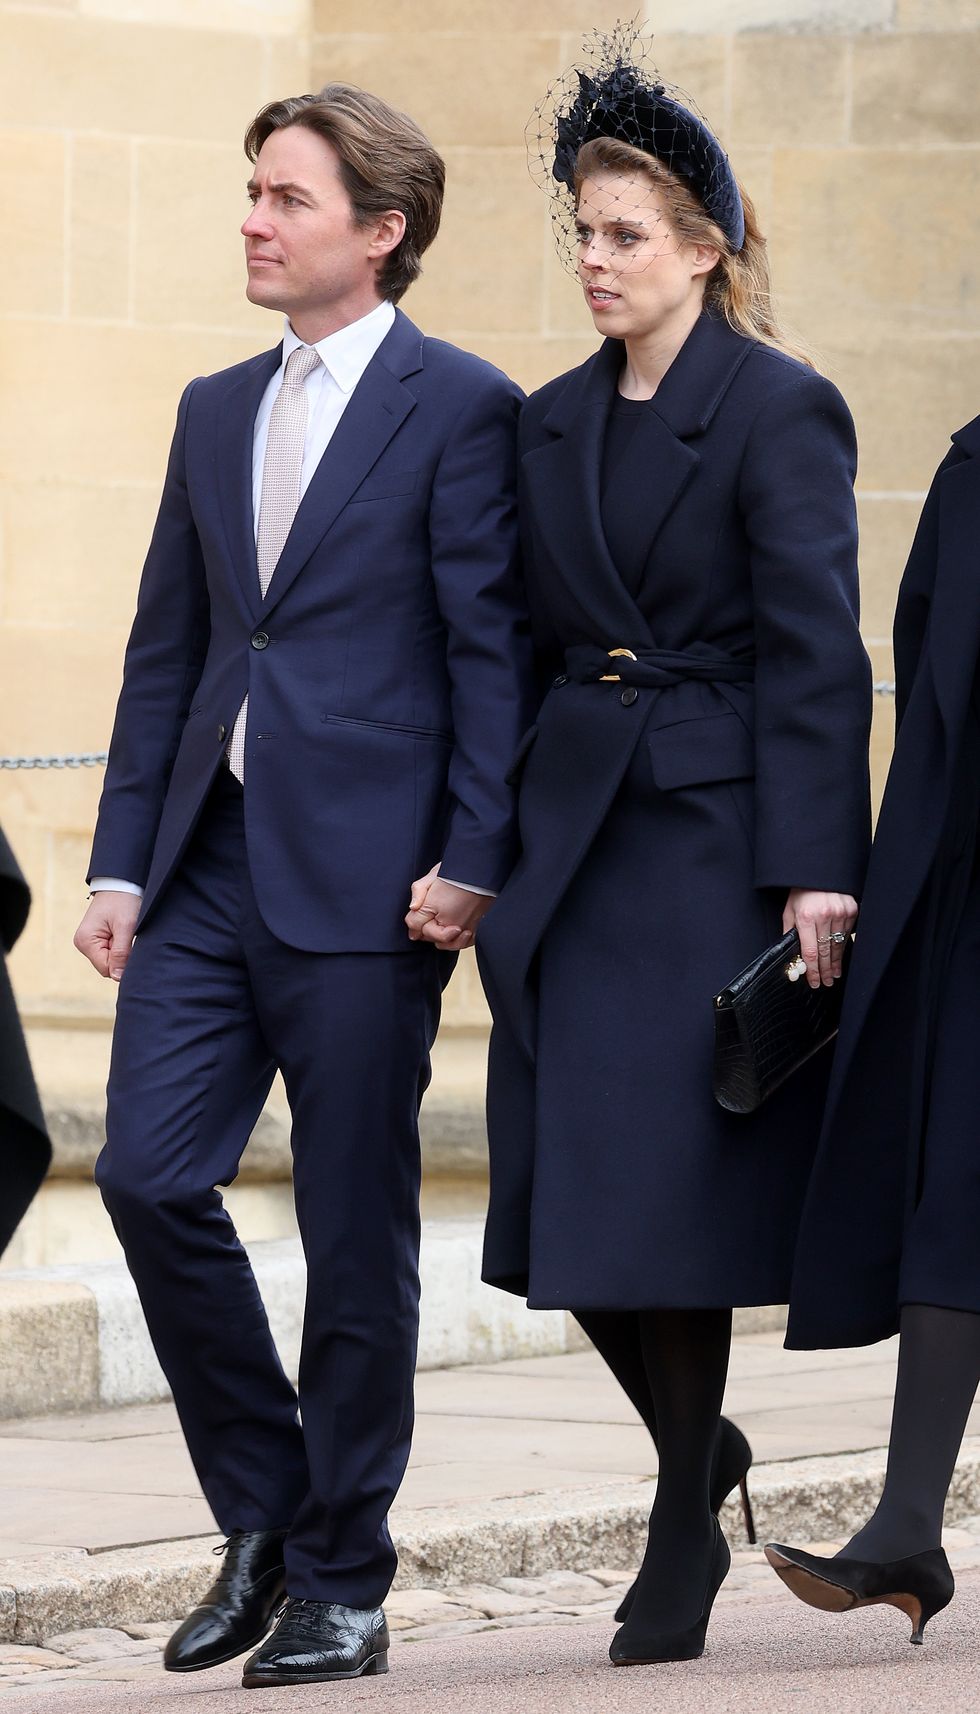 windsor, england february 27 princess beatrice and edoardo mapelli mozzi arrive for the thanksgiving service for king constantine of the hellenes at st georges chapel on february 27, 2024 in windsor, england constantine ii, head of the royal house of greece, reigned as the last king of the hellenes from 6 march 1964 to 1 june 1973, and died in athens at the age of 82 photo by chris jacksongetty images